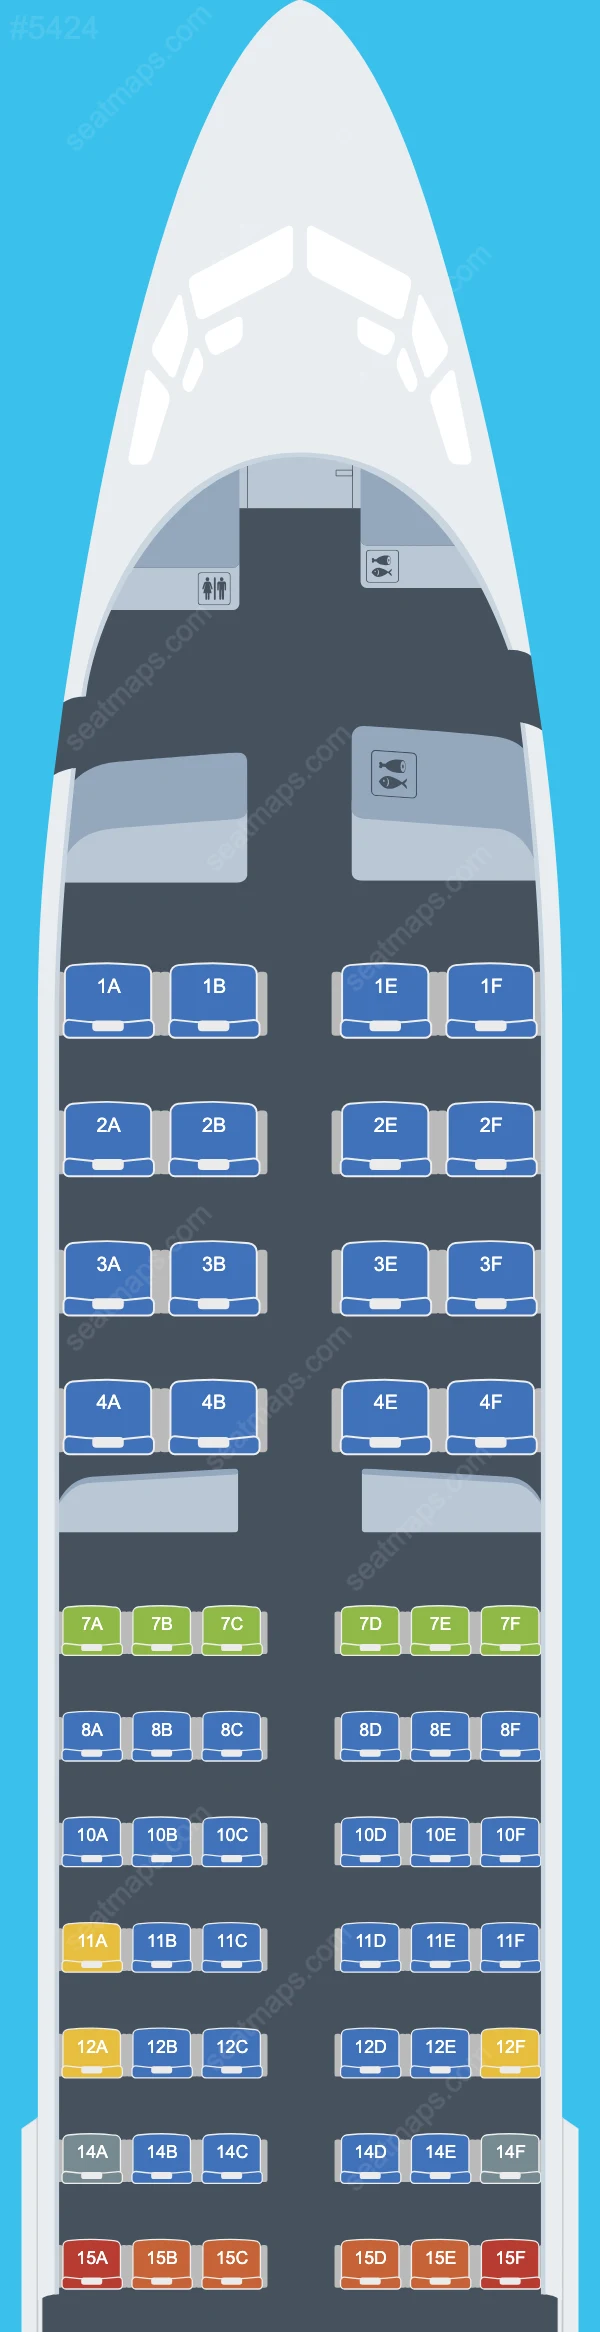 United Boeing 737-800 V.1 seatmap preview